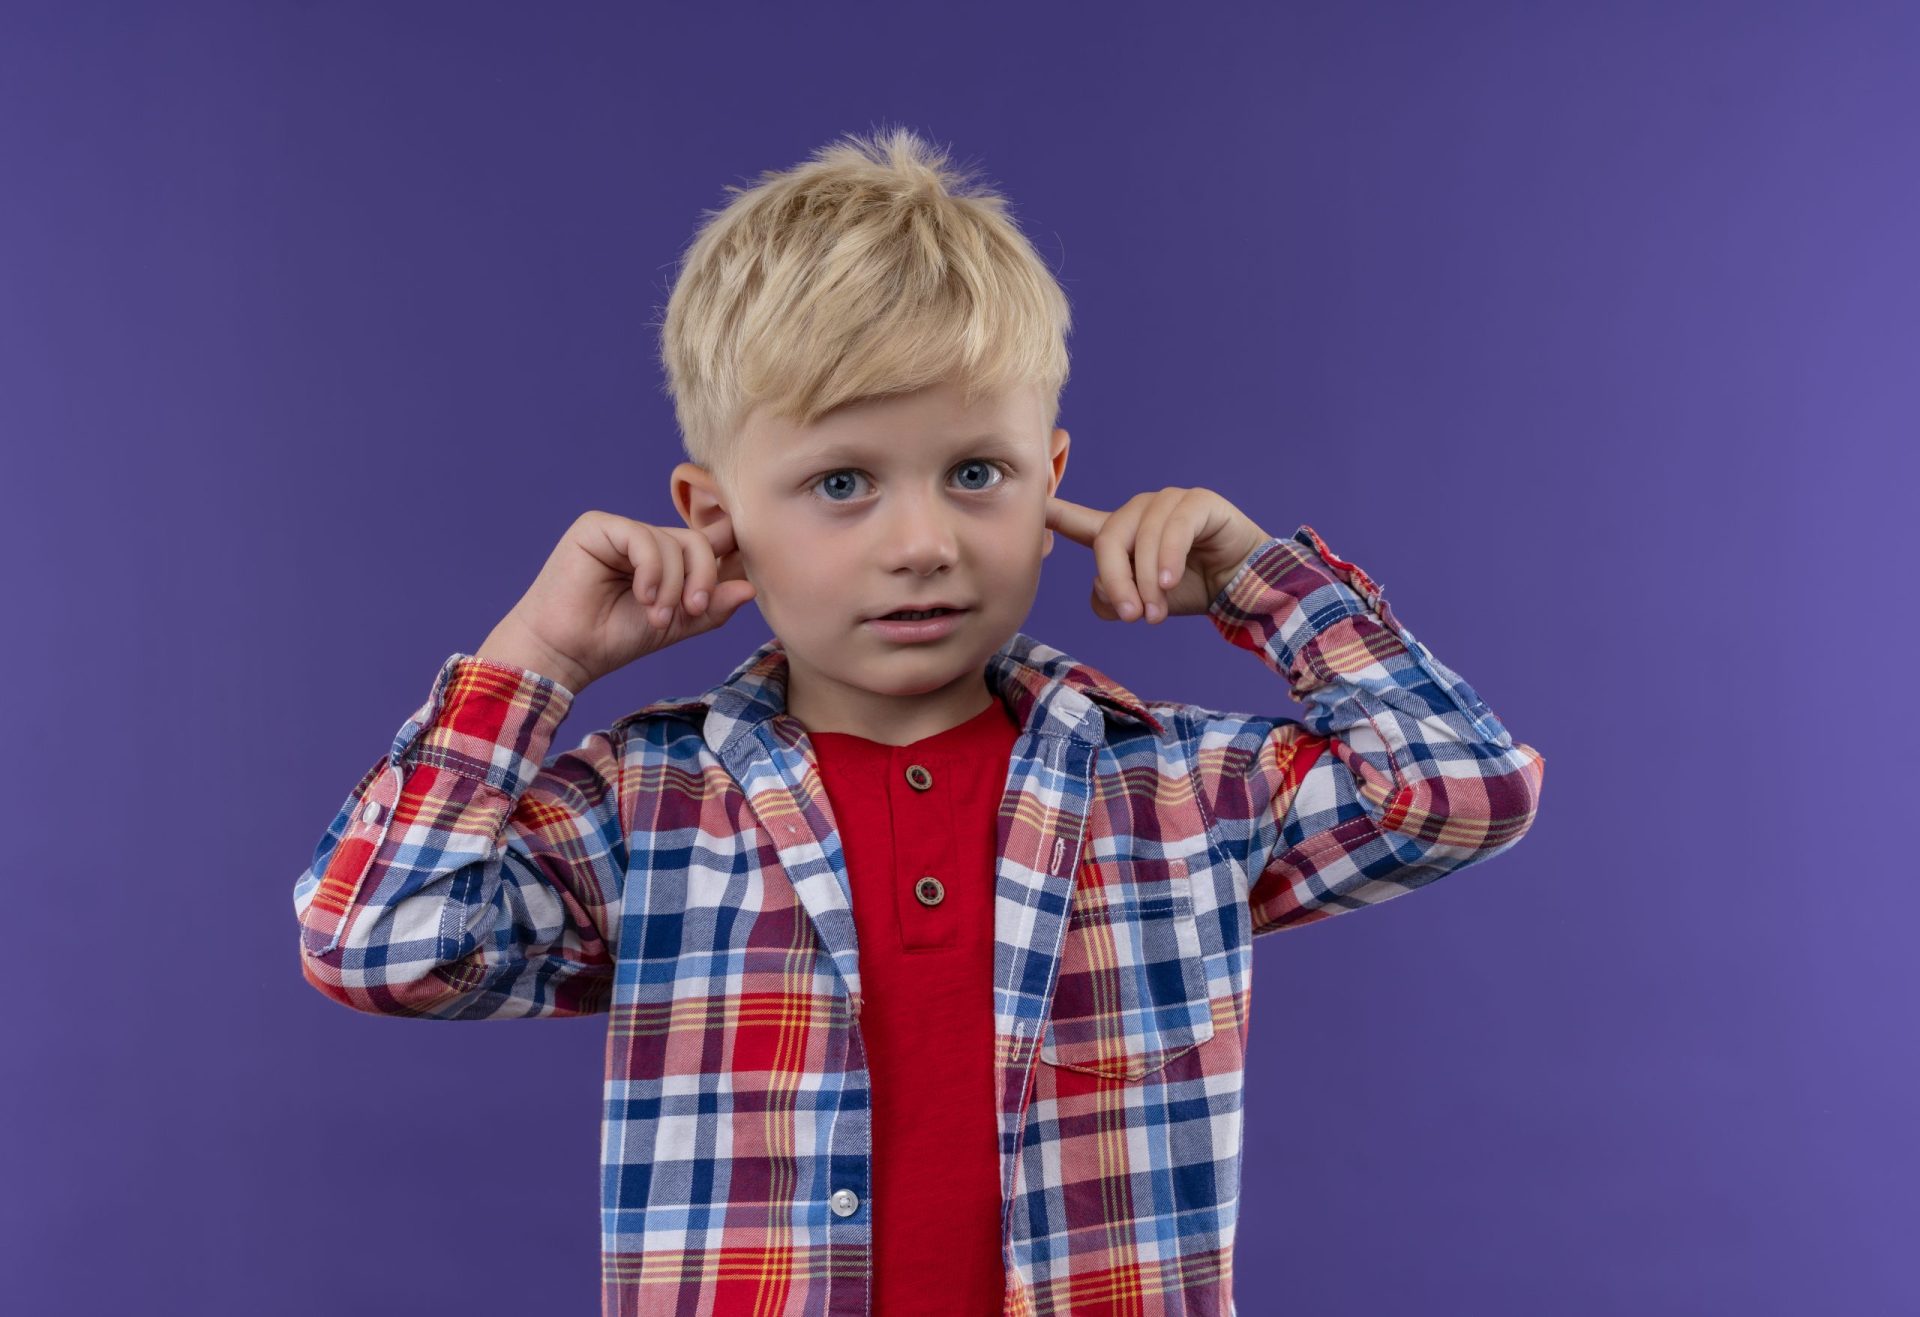 a cute little boy with blonde hair wearing checked shirt keeping hand on ears on a purple background